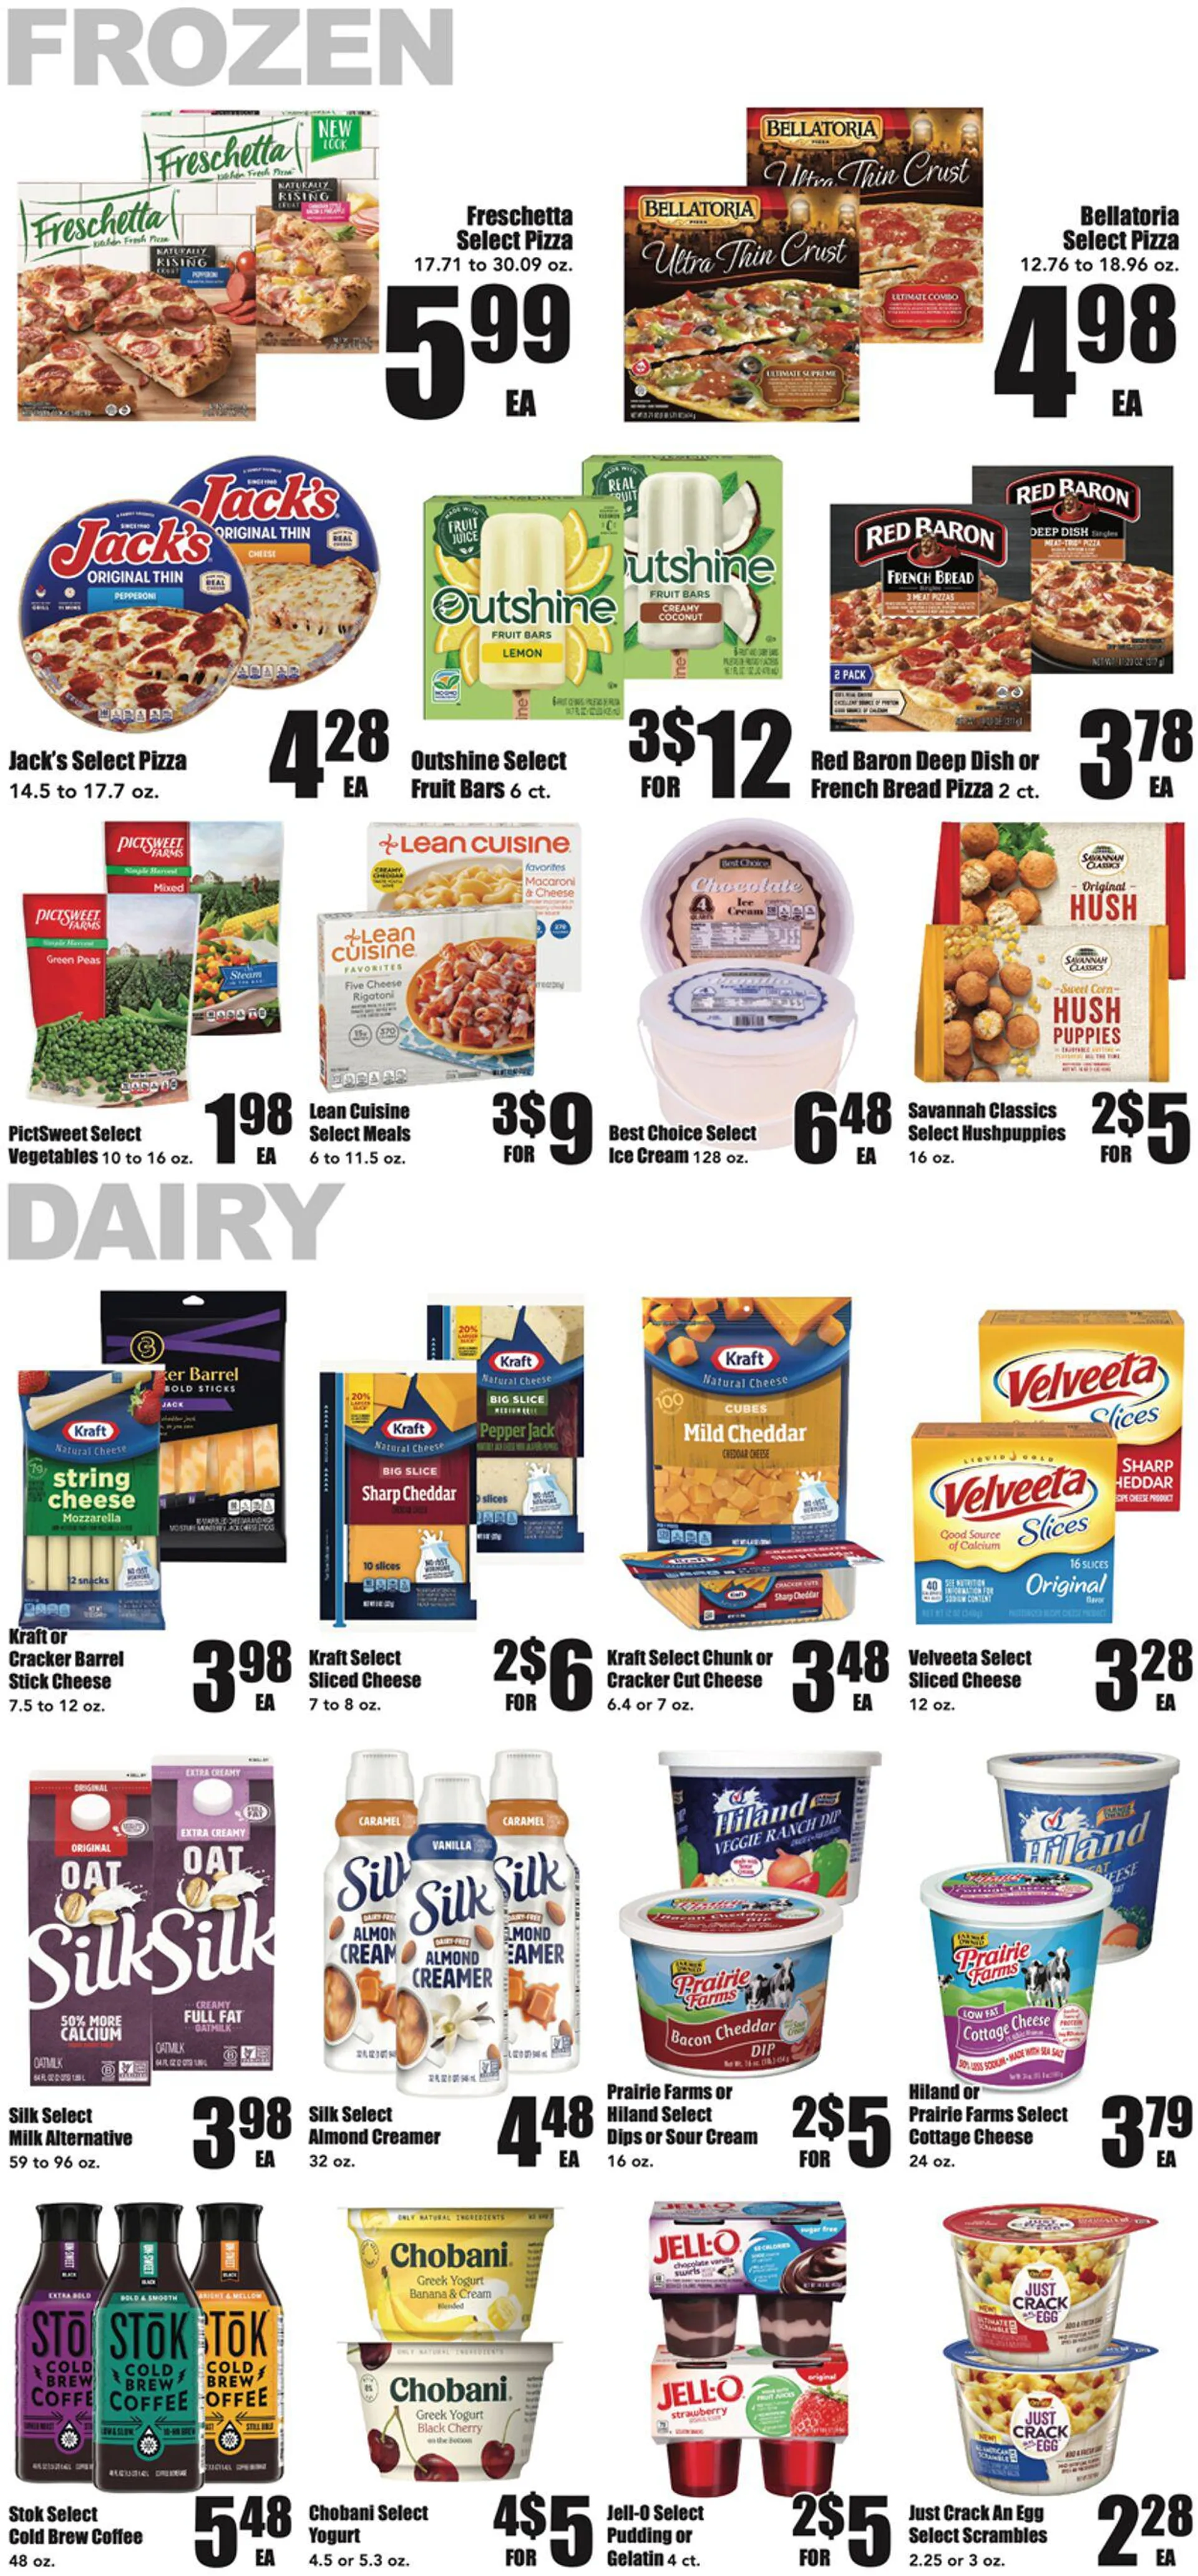 Warehouse Market Current weekly ad - 3